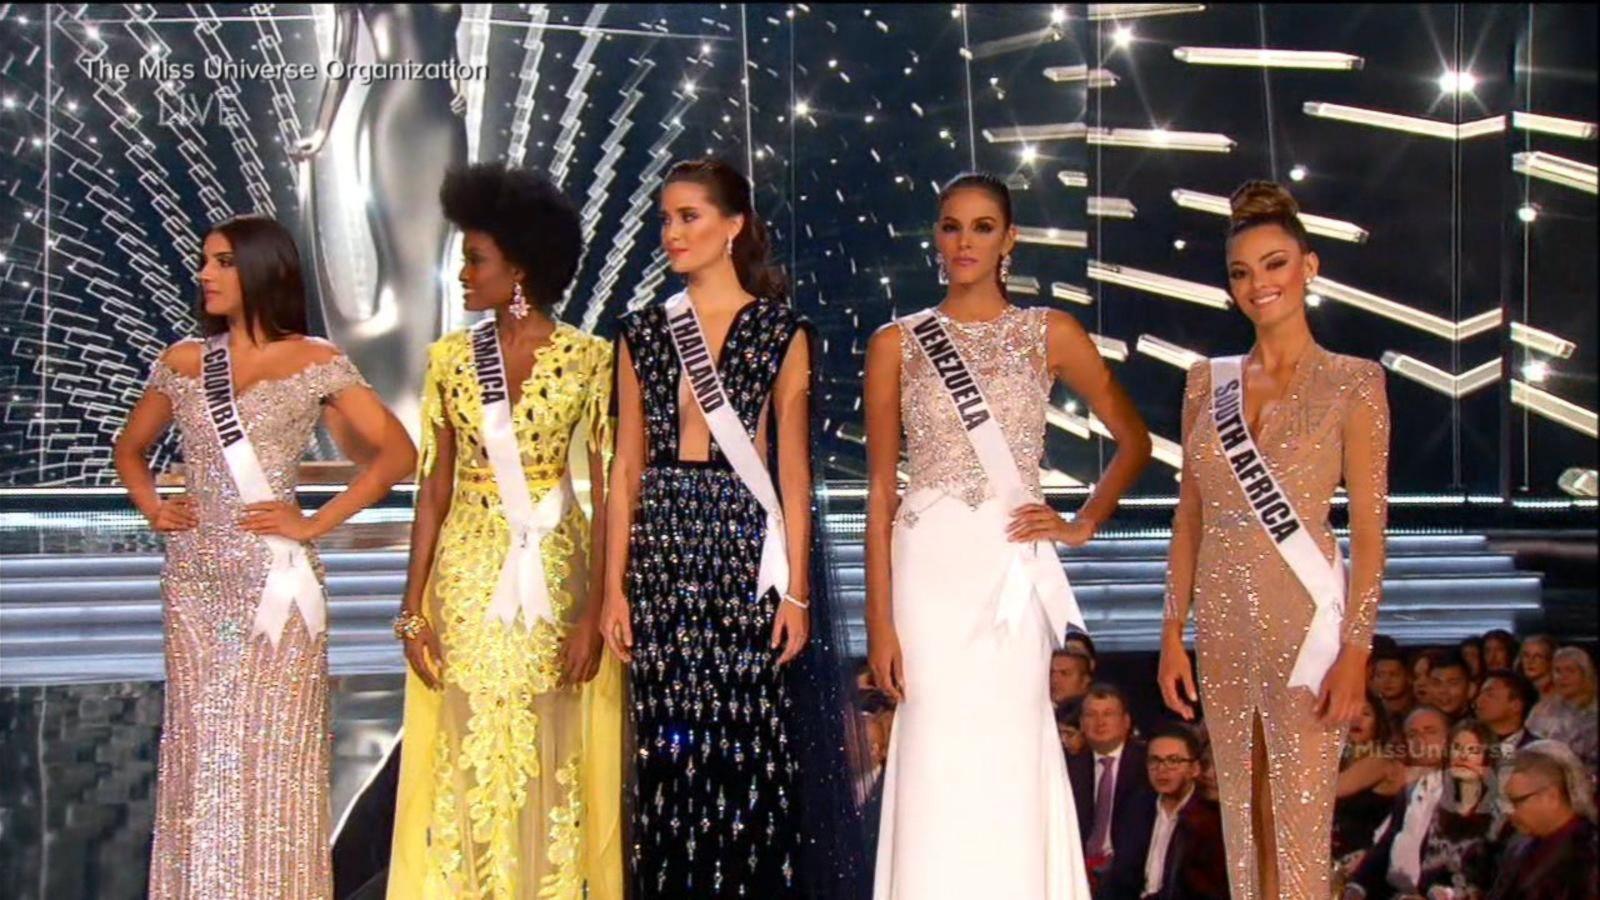 Miss Universe announces all its judges this year will be women